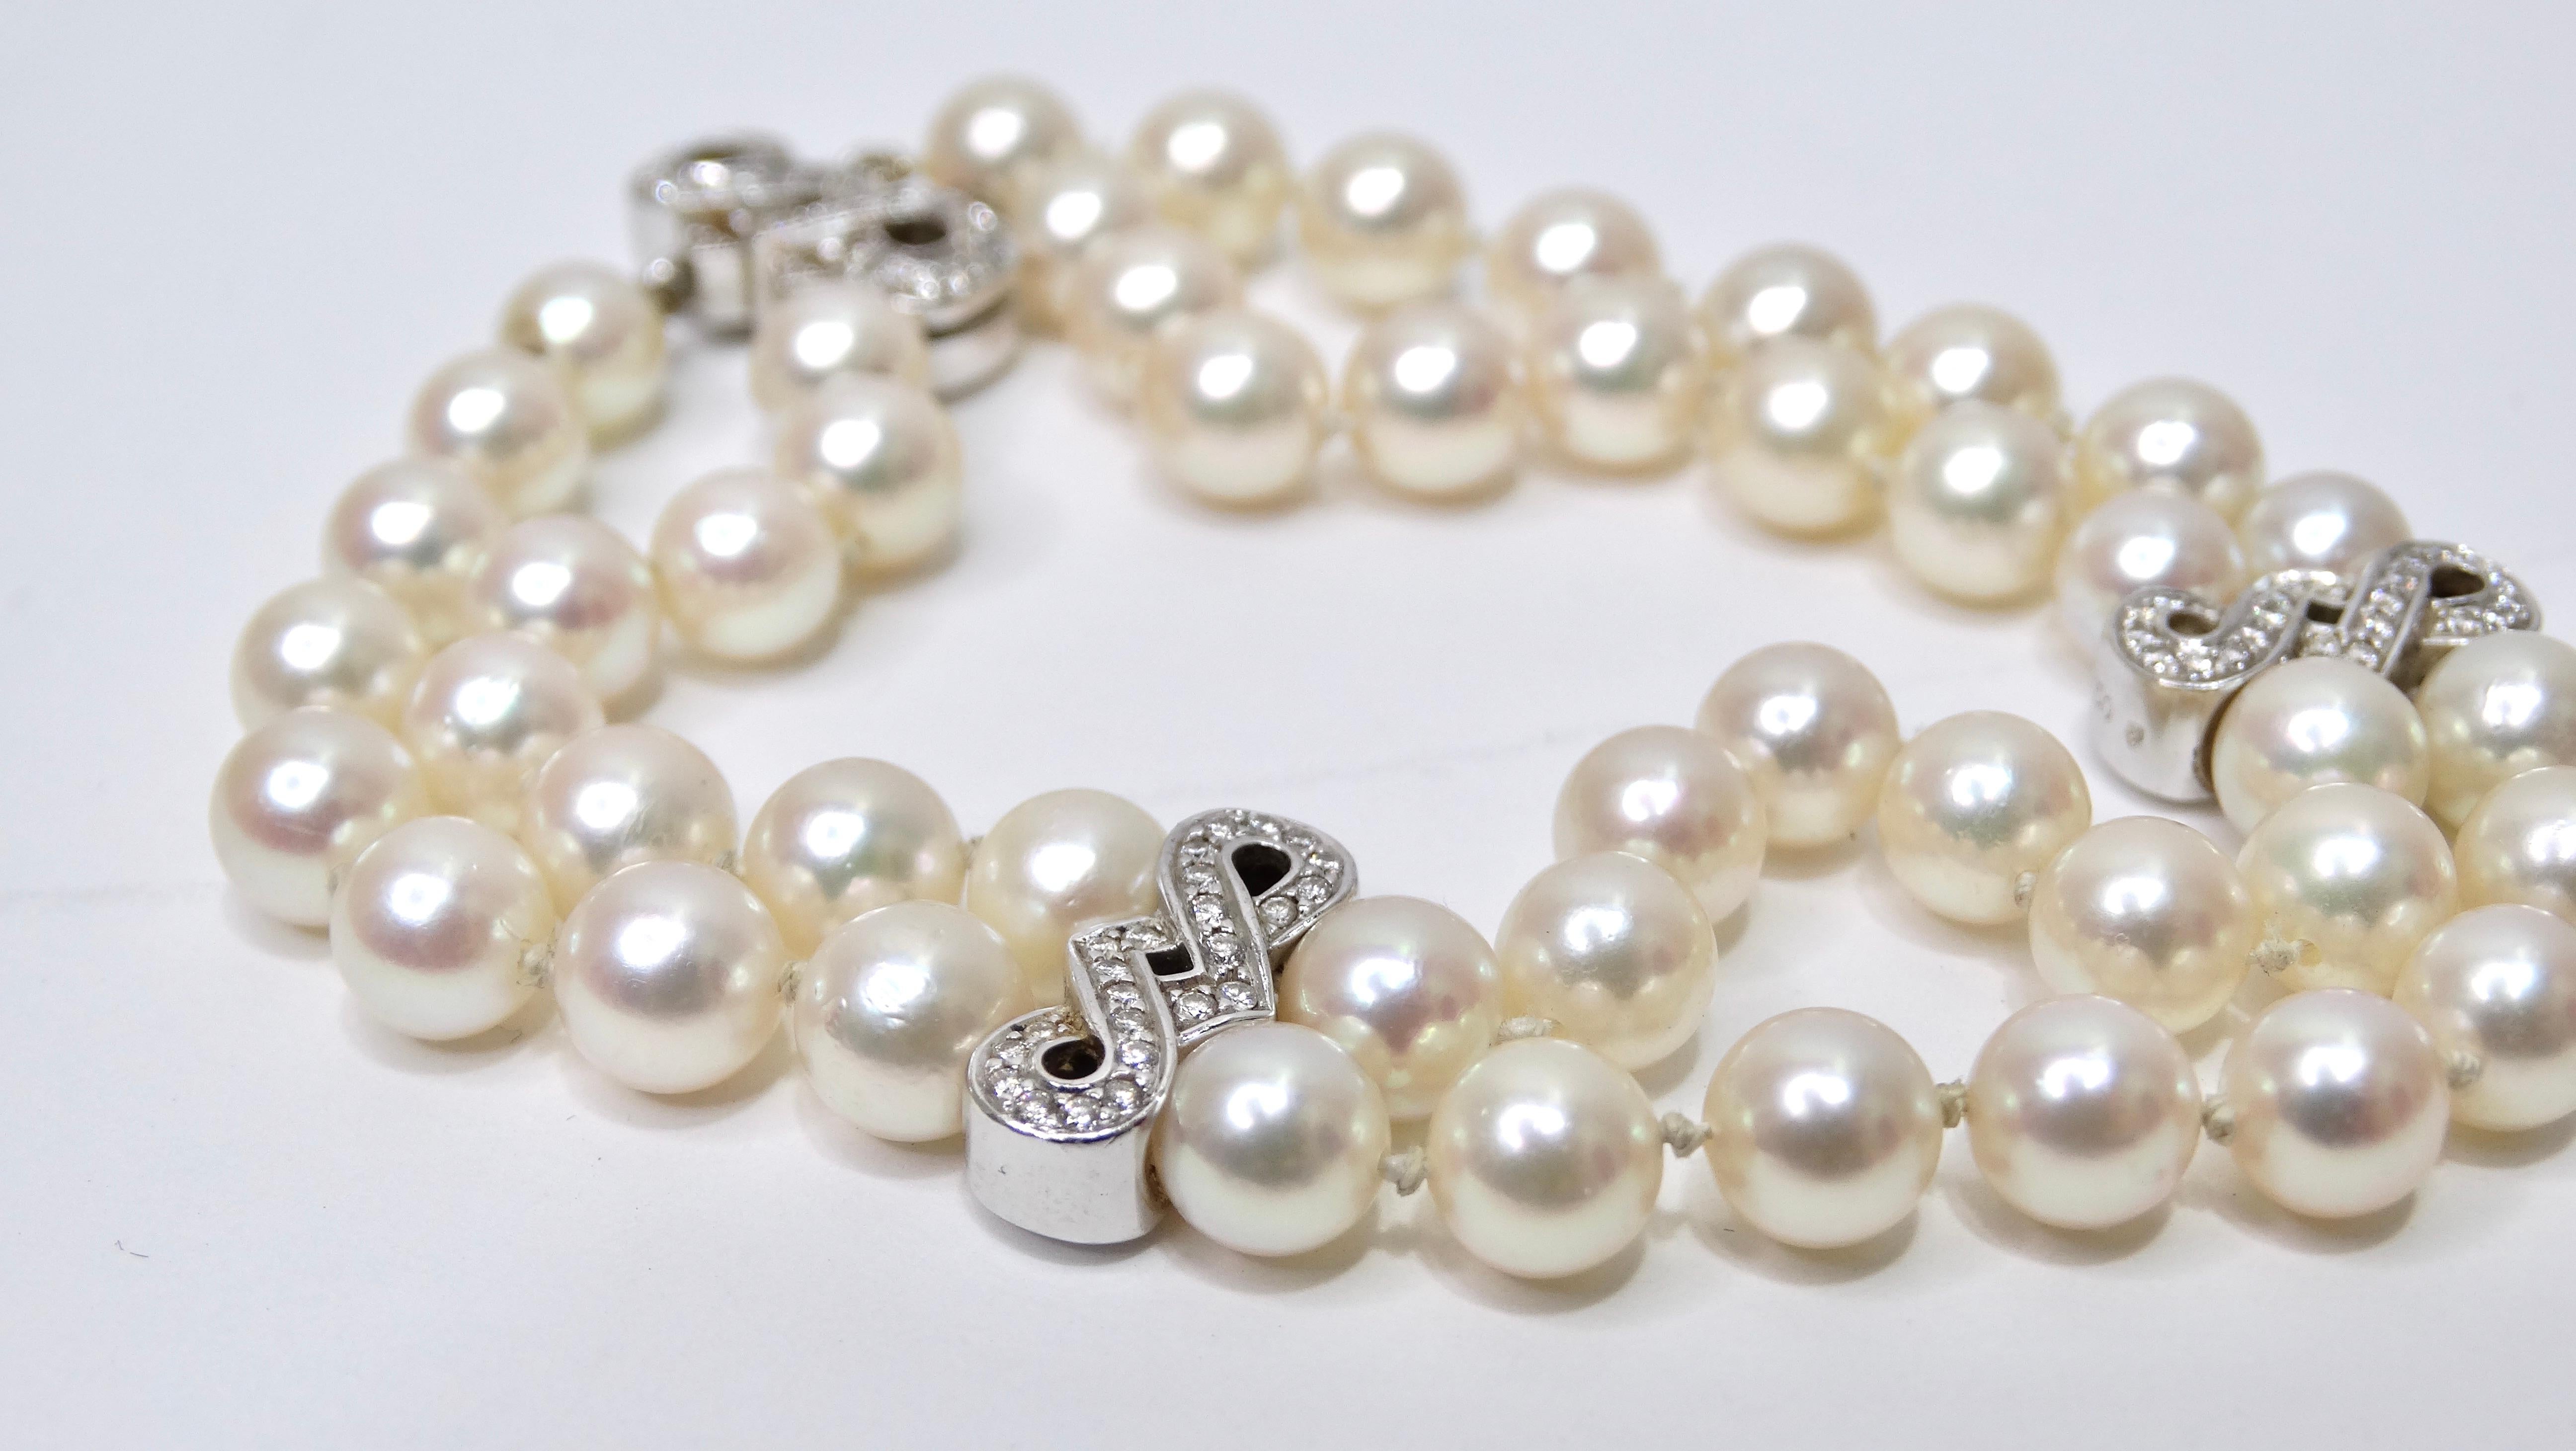 A beautifully made elegant authentic freshwater pearl bracelet that anyone can use in their jewelry collection. Pearls are decadent and one of the most coveted materials for jewelry. This bracelet is featured in a 18k white gold with a diamond